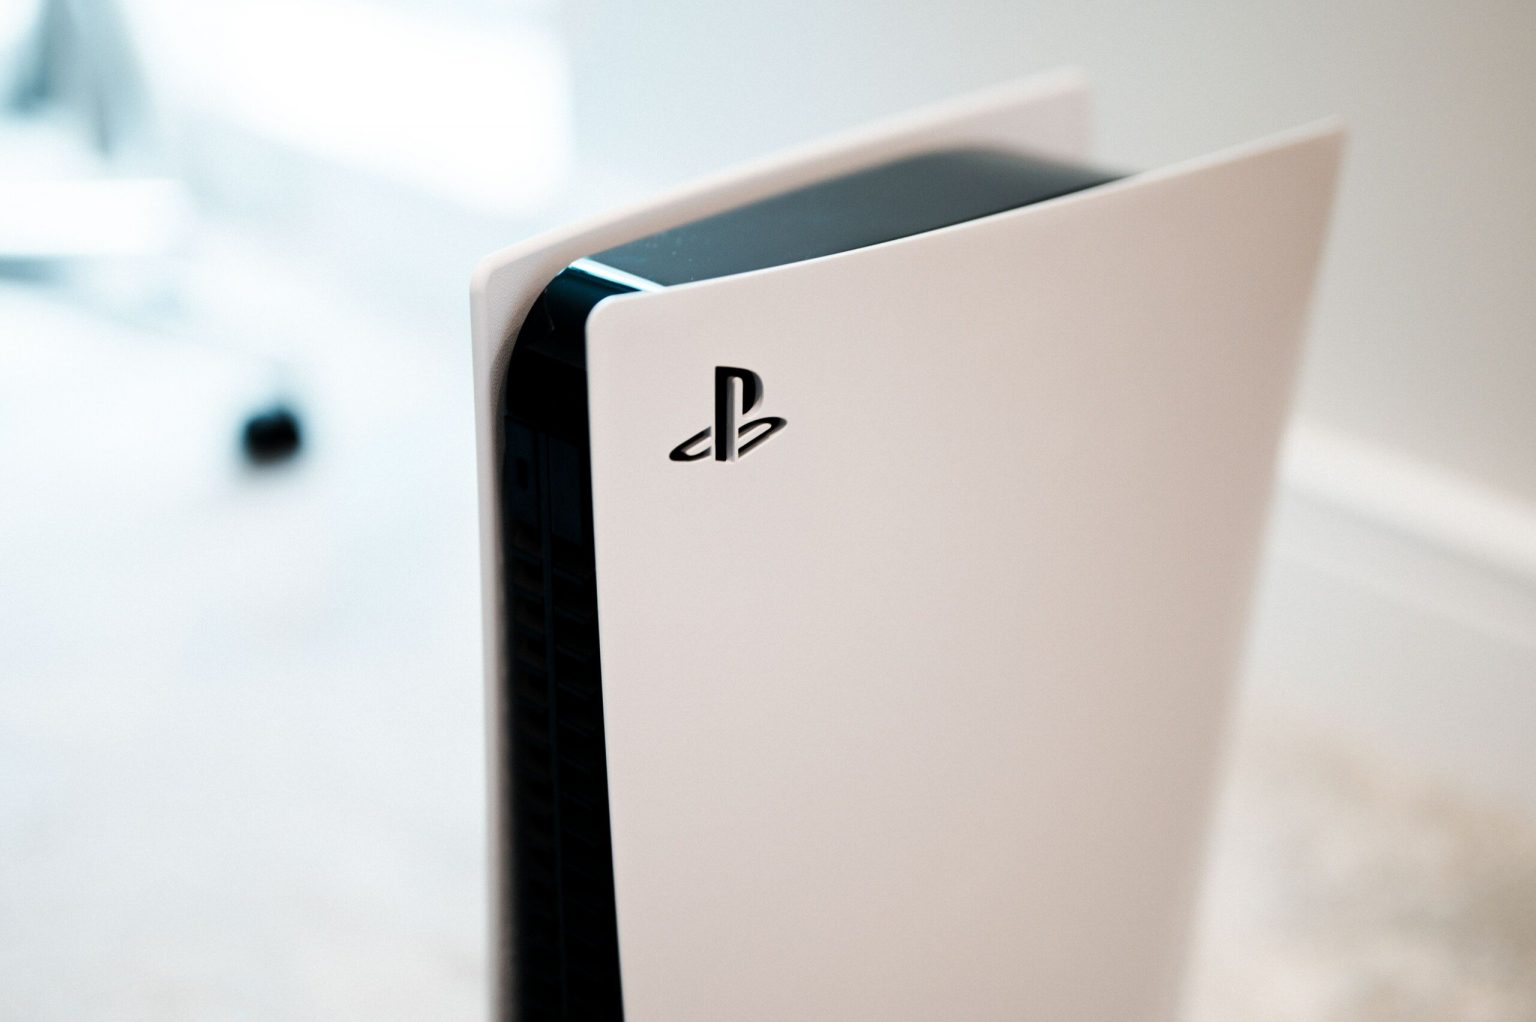 Accessibility Tags roll out this week on PlayStation Store on the PS5  console – PlayStation.Blog